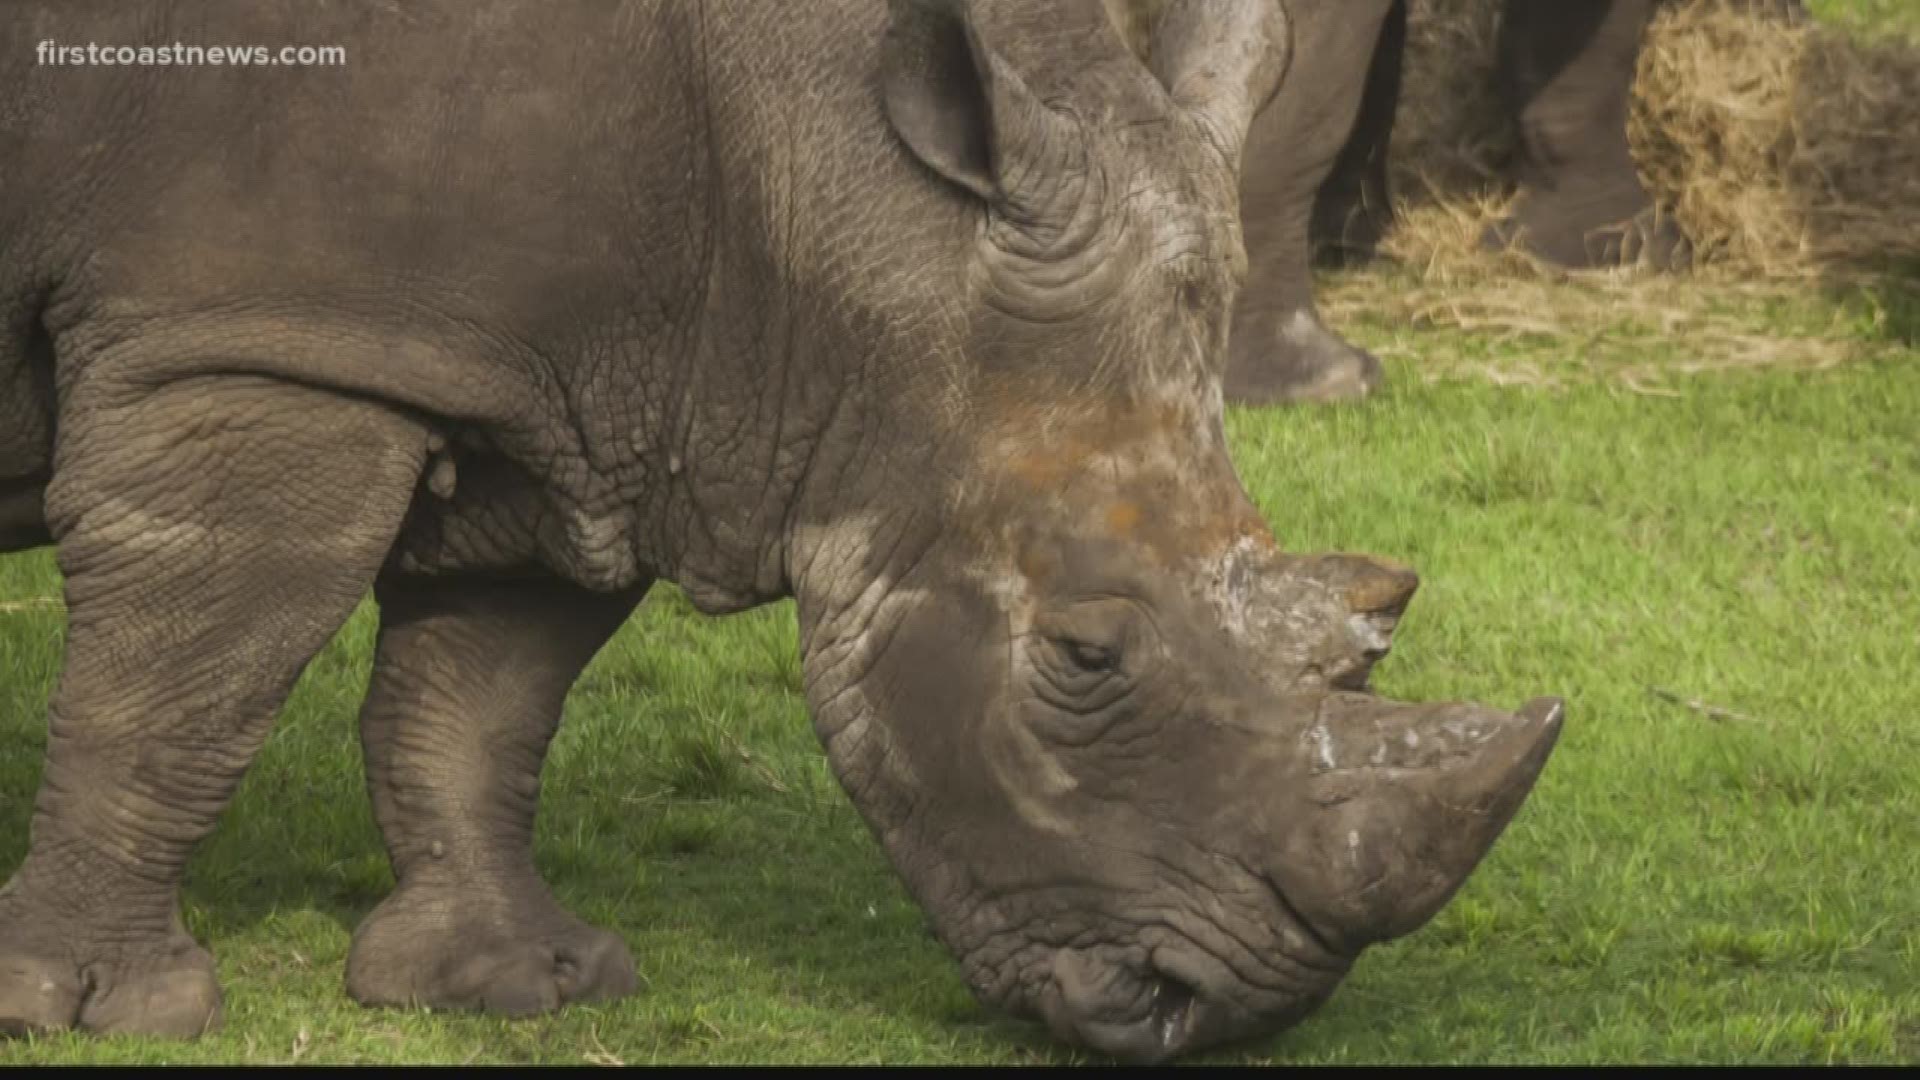 The Jacksonville Zoo's accreditation is in question after an incident in which a rhino injured an employee.